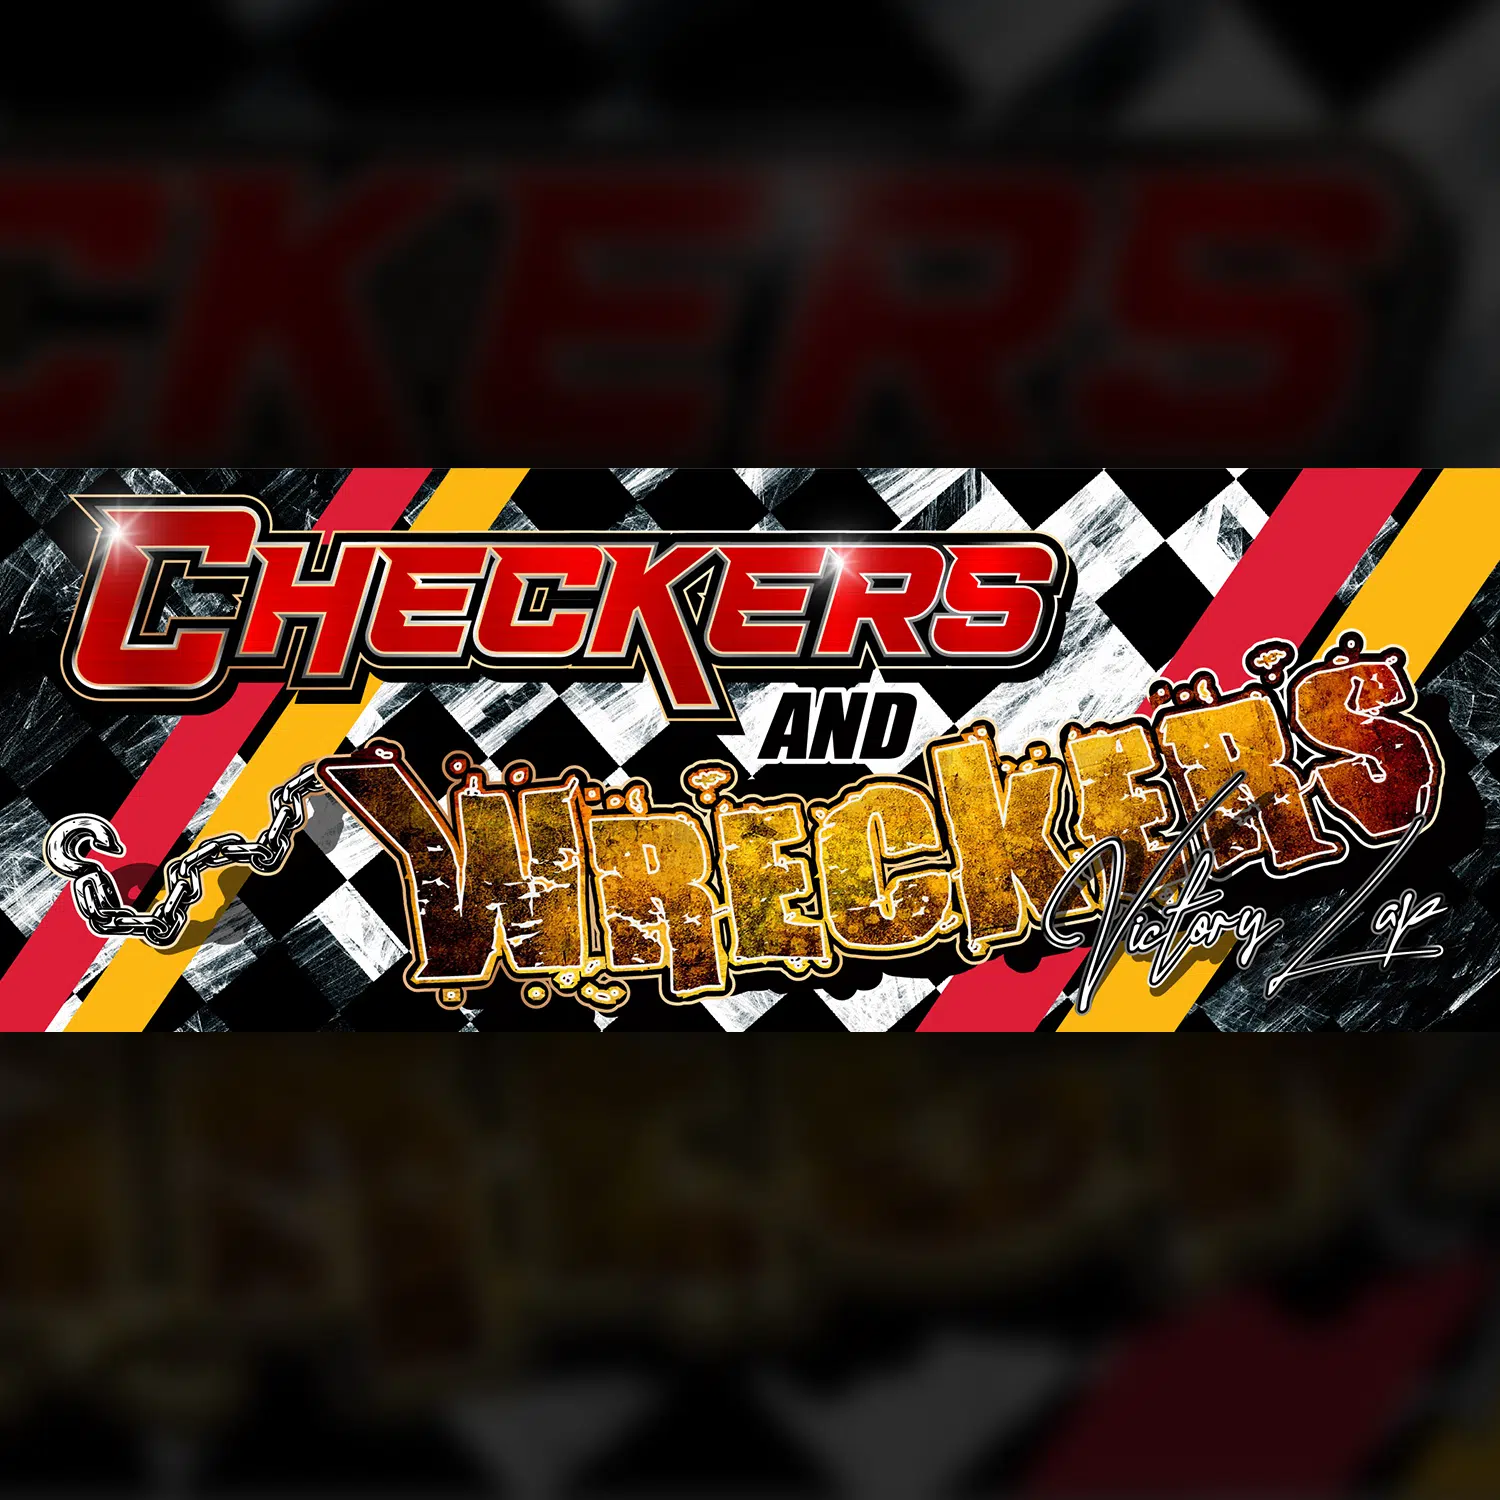 Checkers and Wreckers